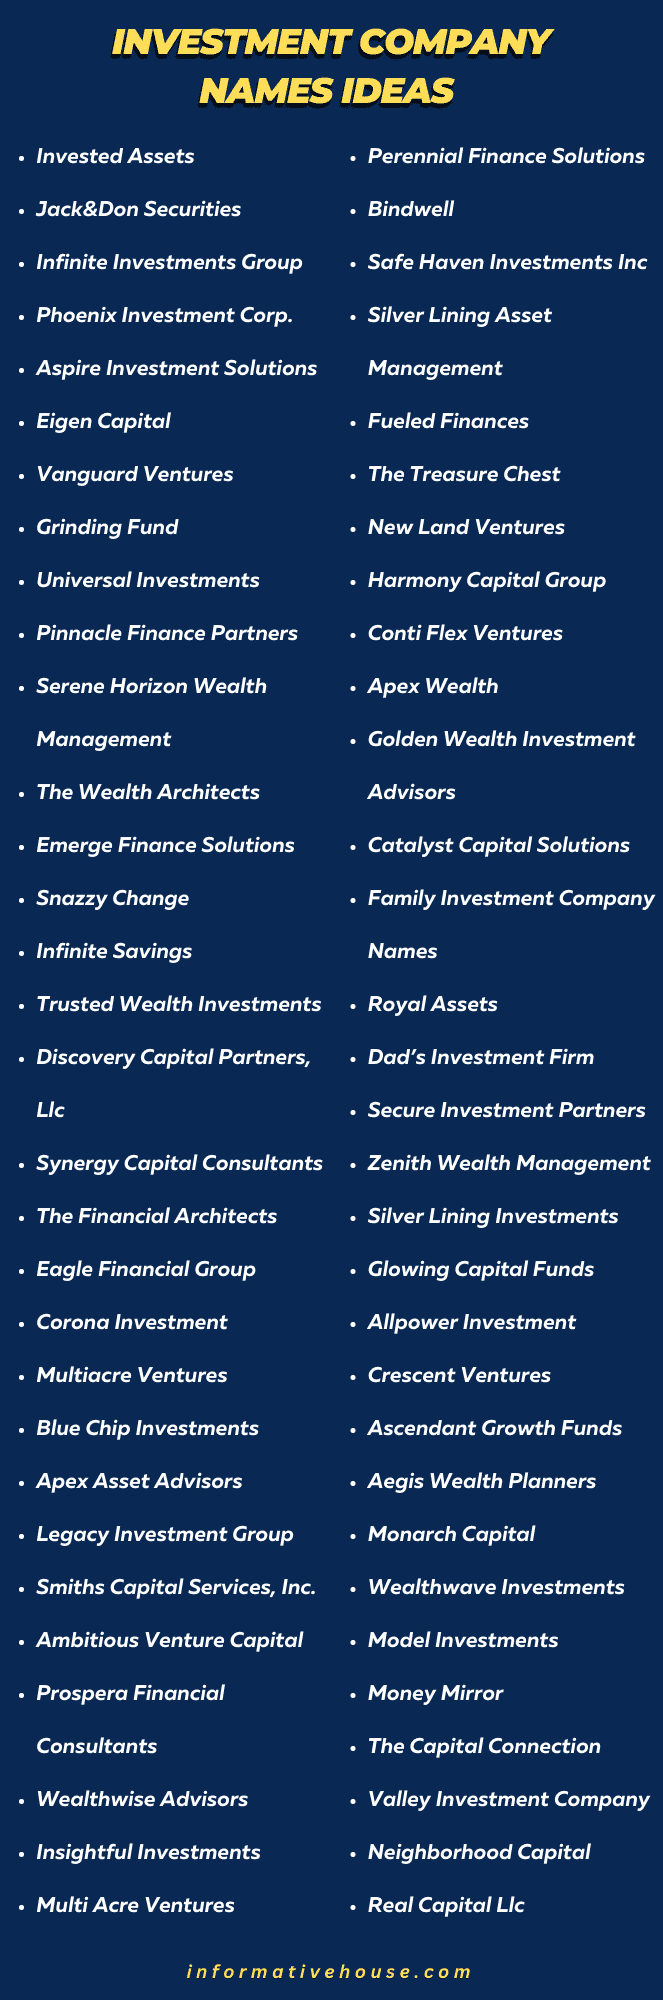 Investment Company Names